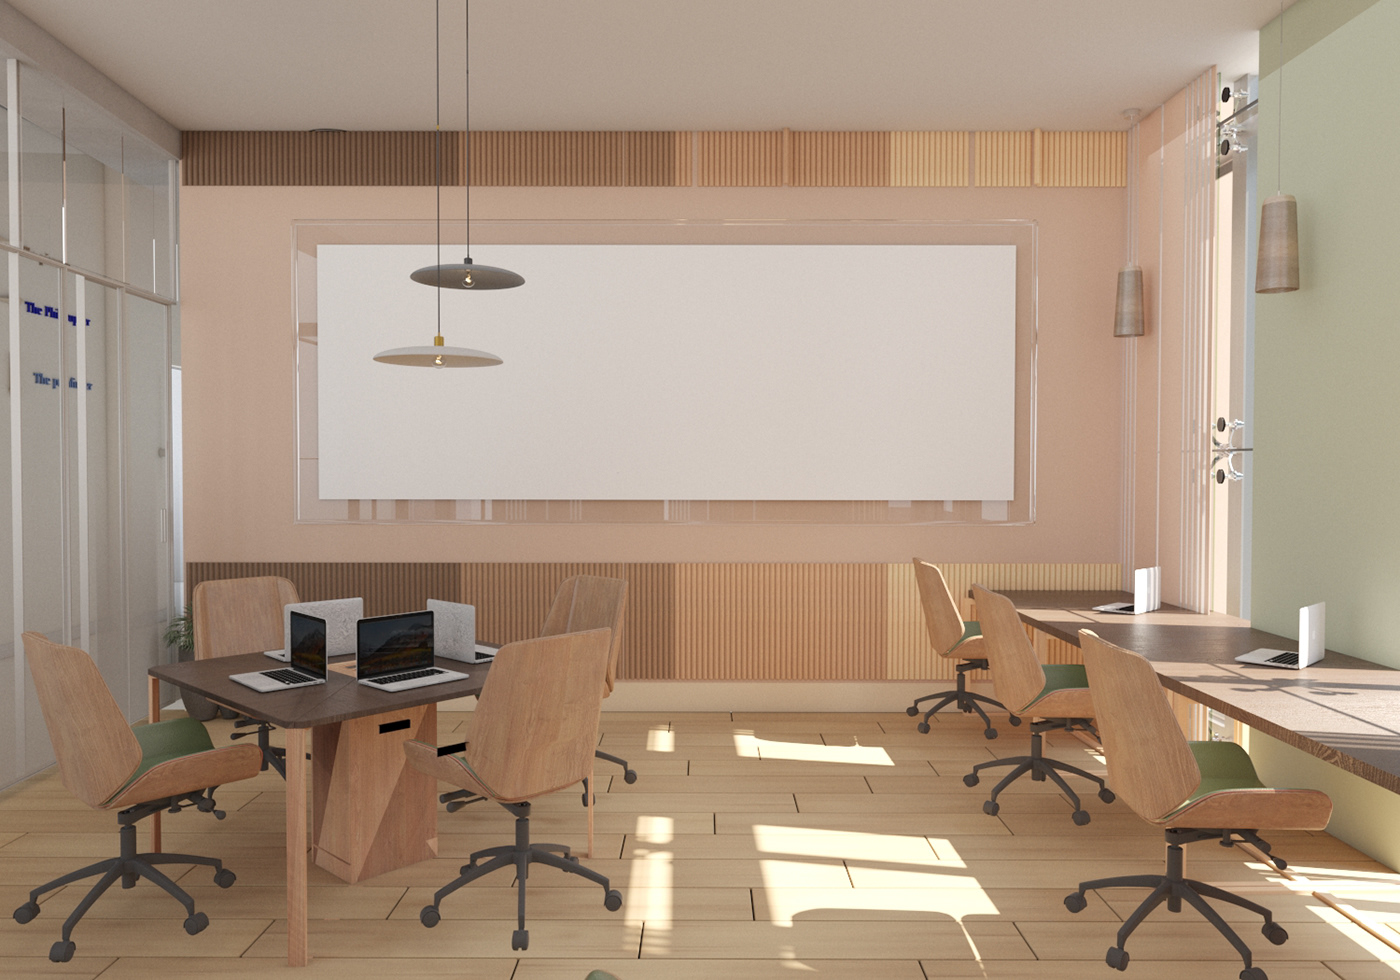 design architect co working space Nature Office Design meeting room 3ds max vray